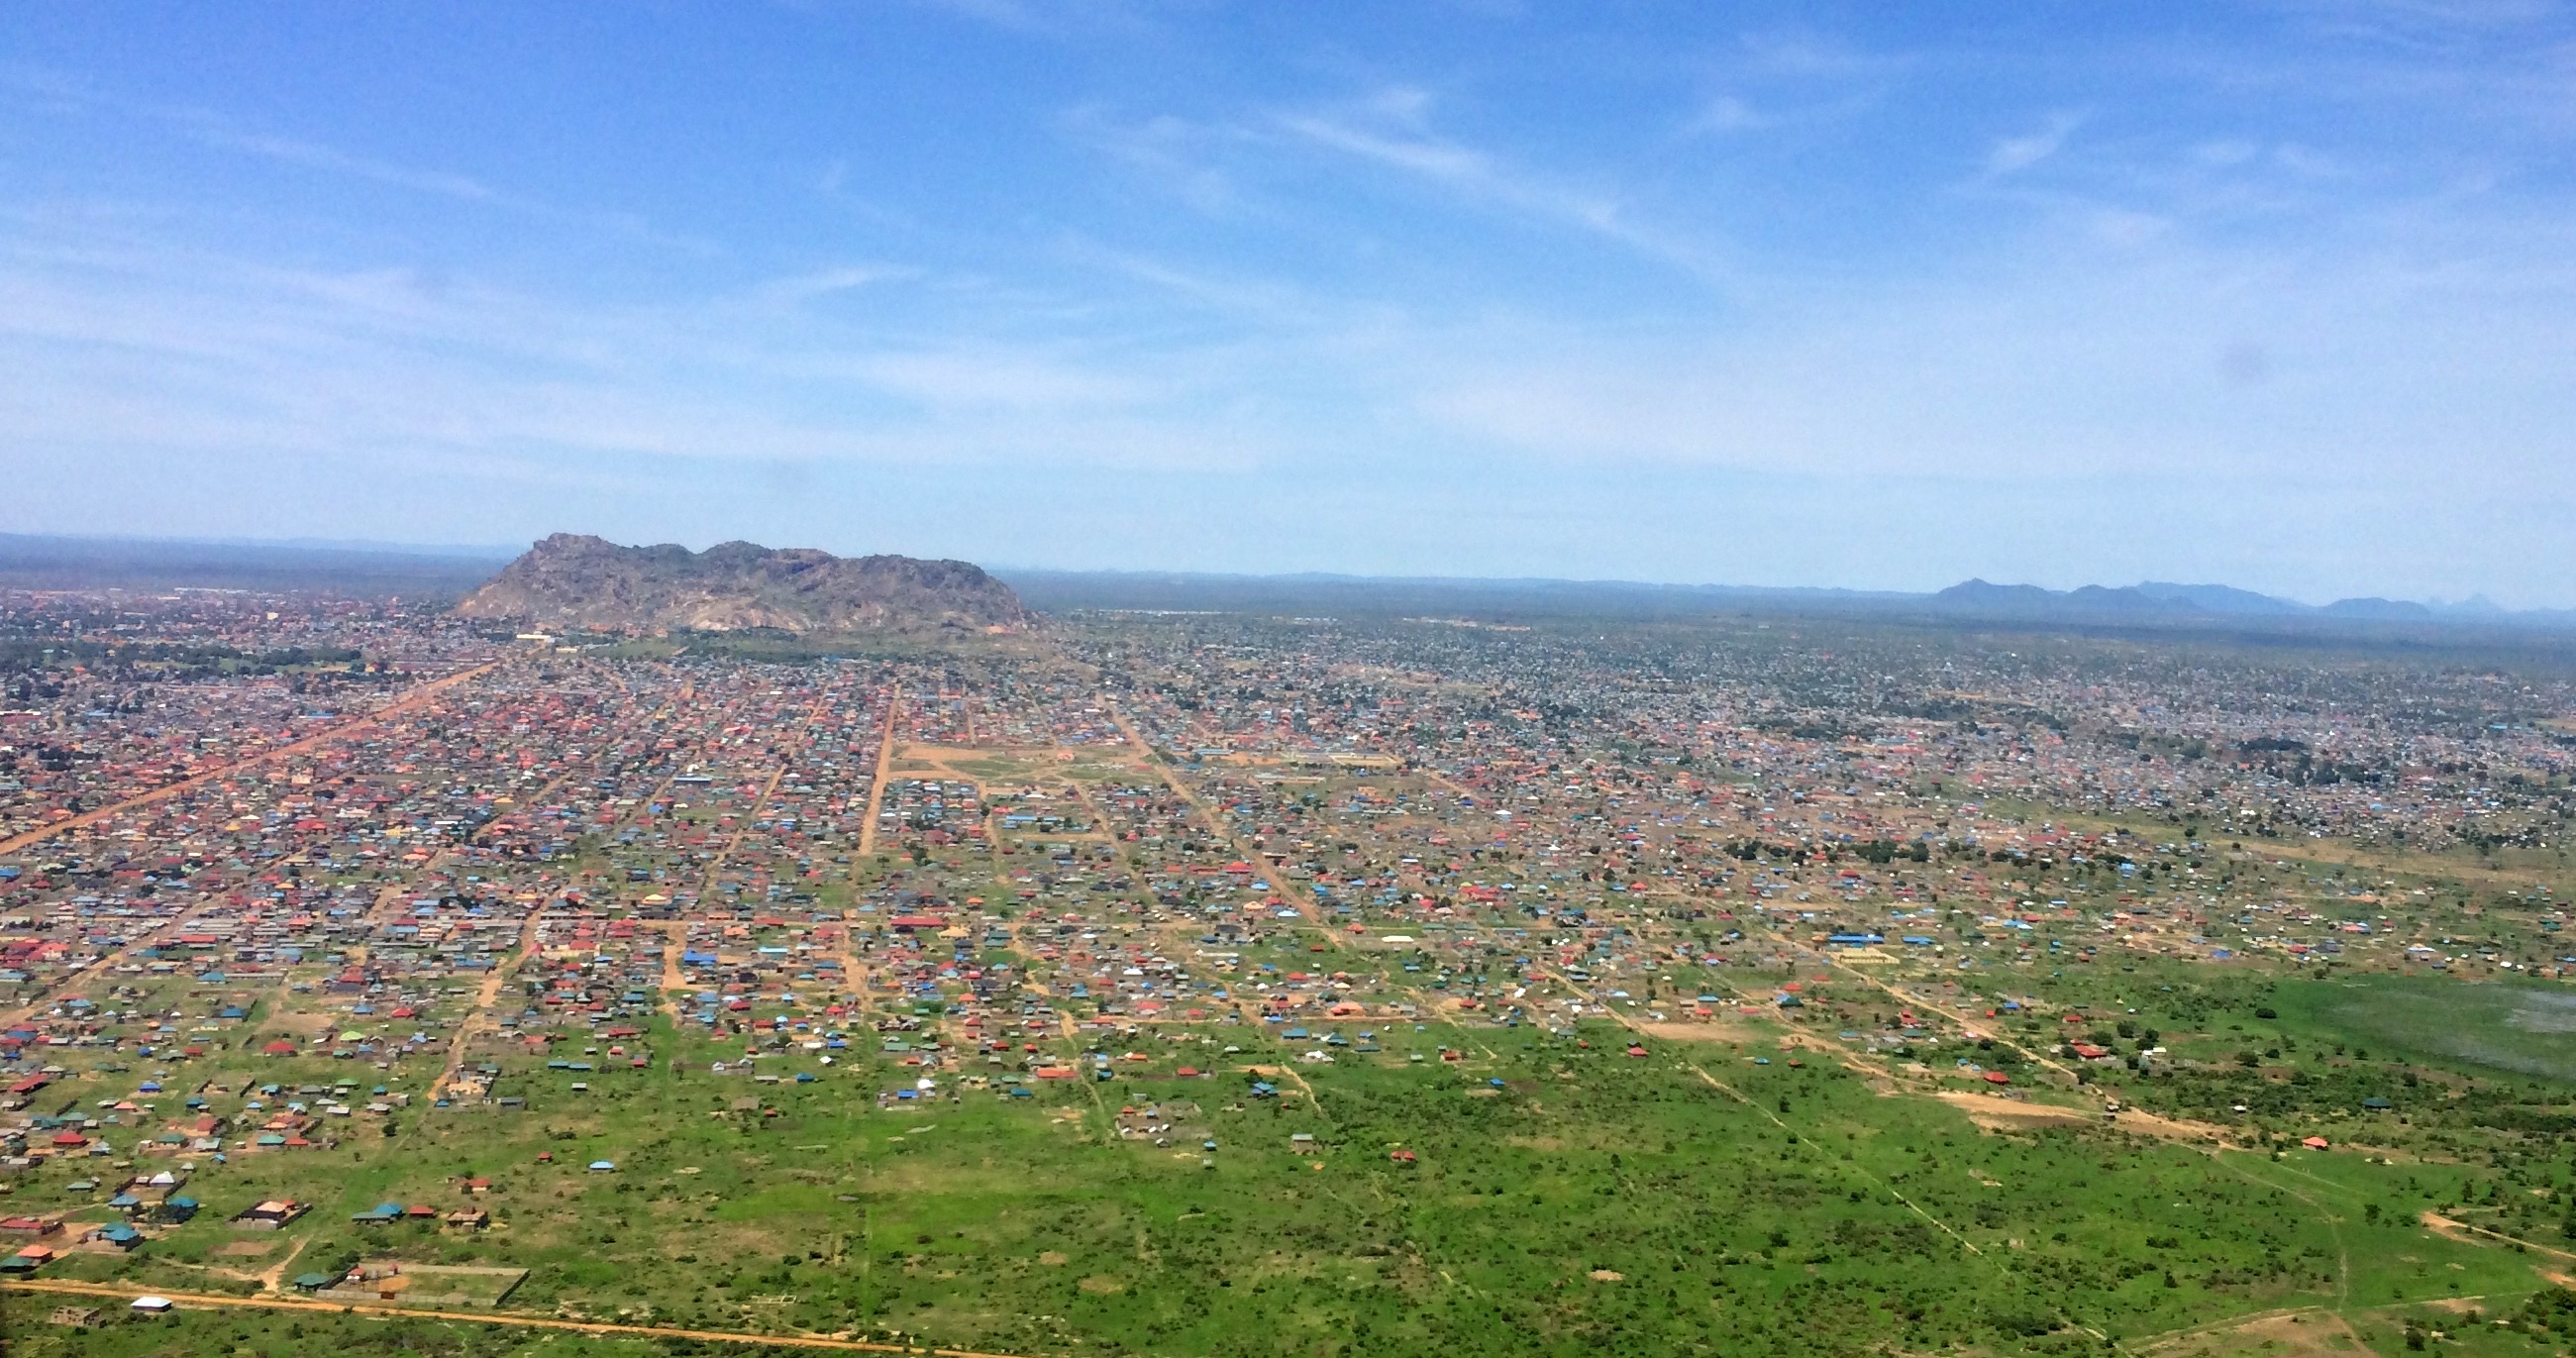 View of Juba from the plane.